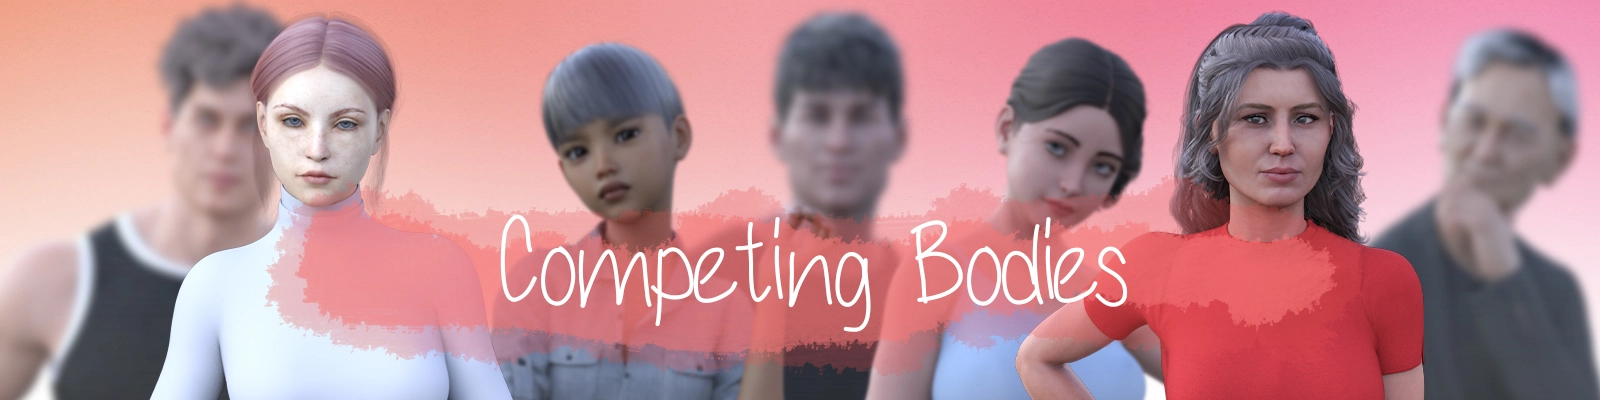 Competing Bodies [v0.1] main image